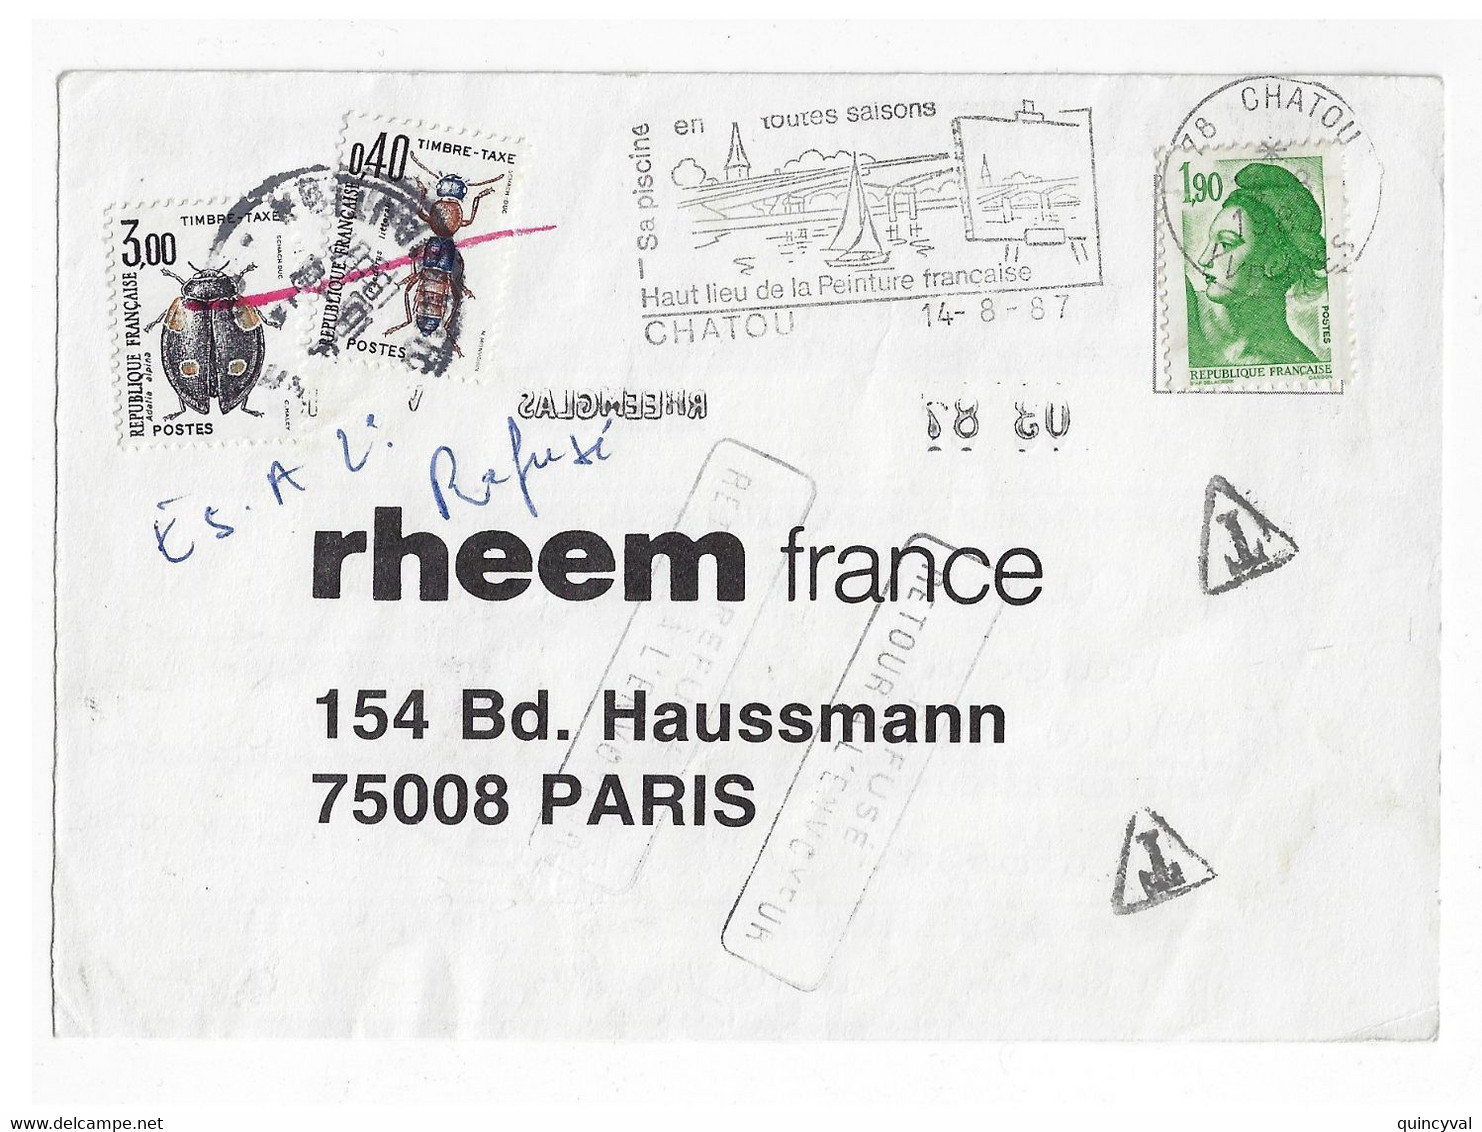 CHATOU 78 Carte Postale Commerciale RHEEM Affranchie Liberté 1,90 F Yv 2424 Ob 1987 TAXE REFUSEE Insectes Yv T 110 111 - 1960-.... Briefe & Dokumente